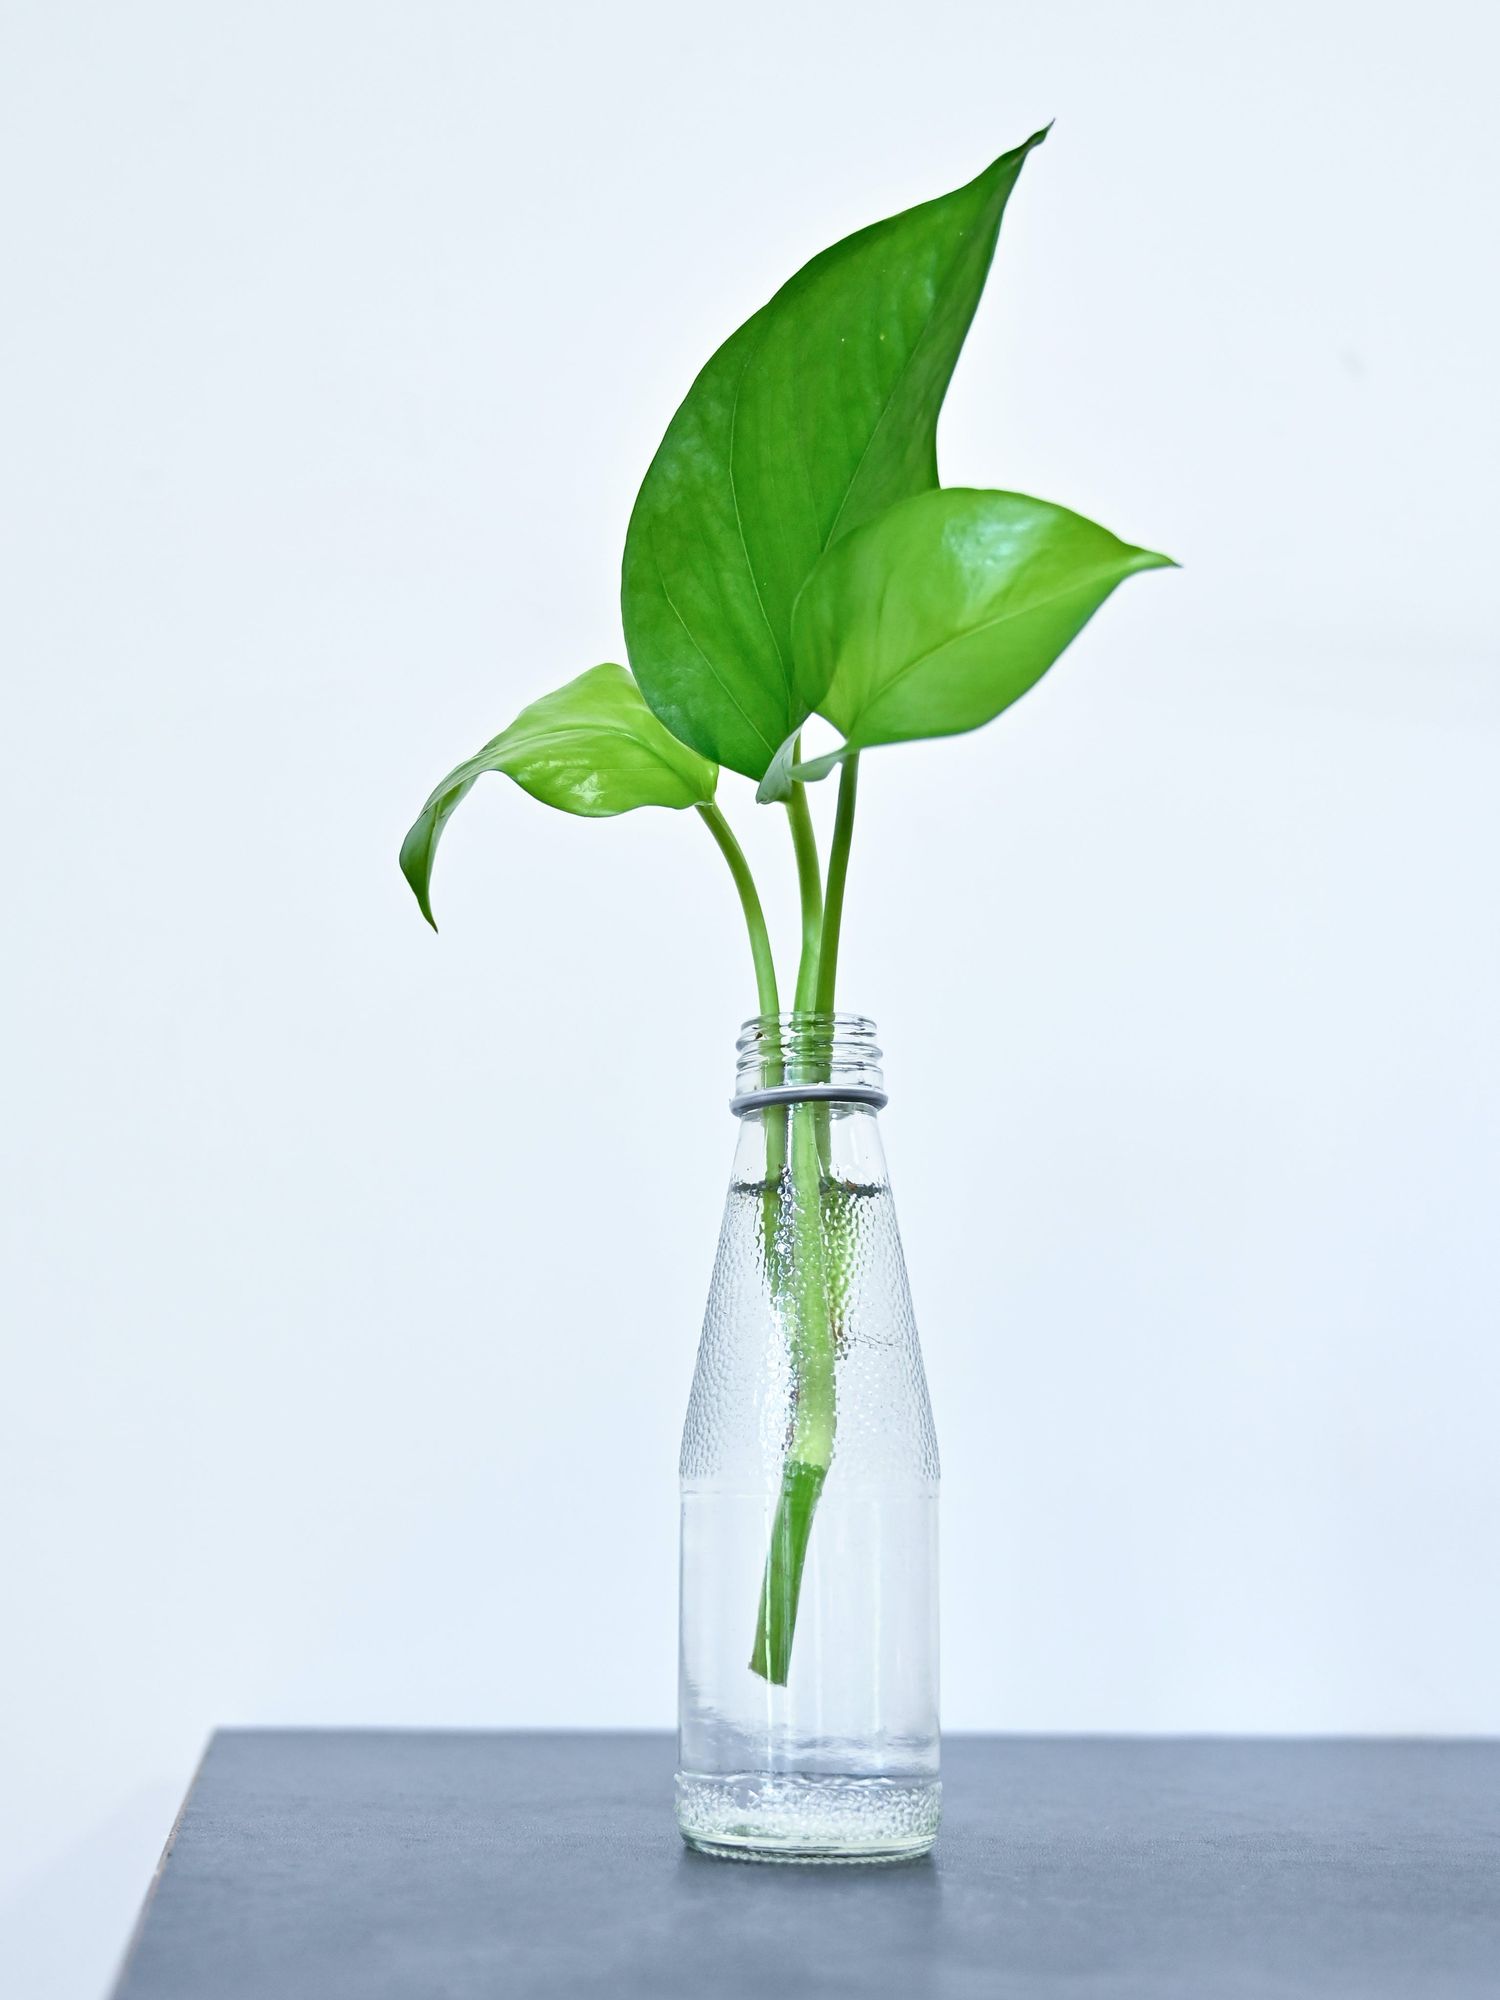 plant cutting in glass